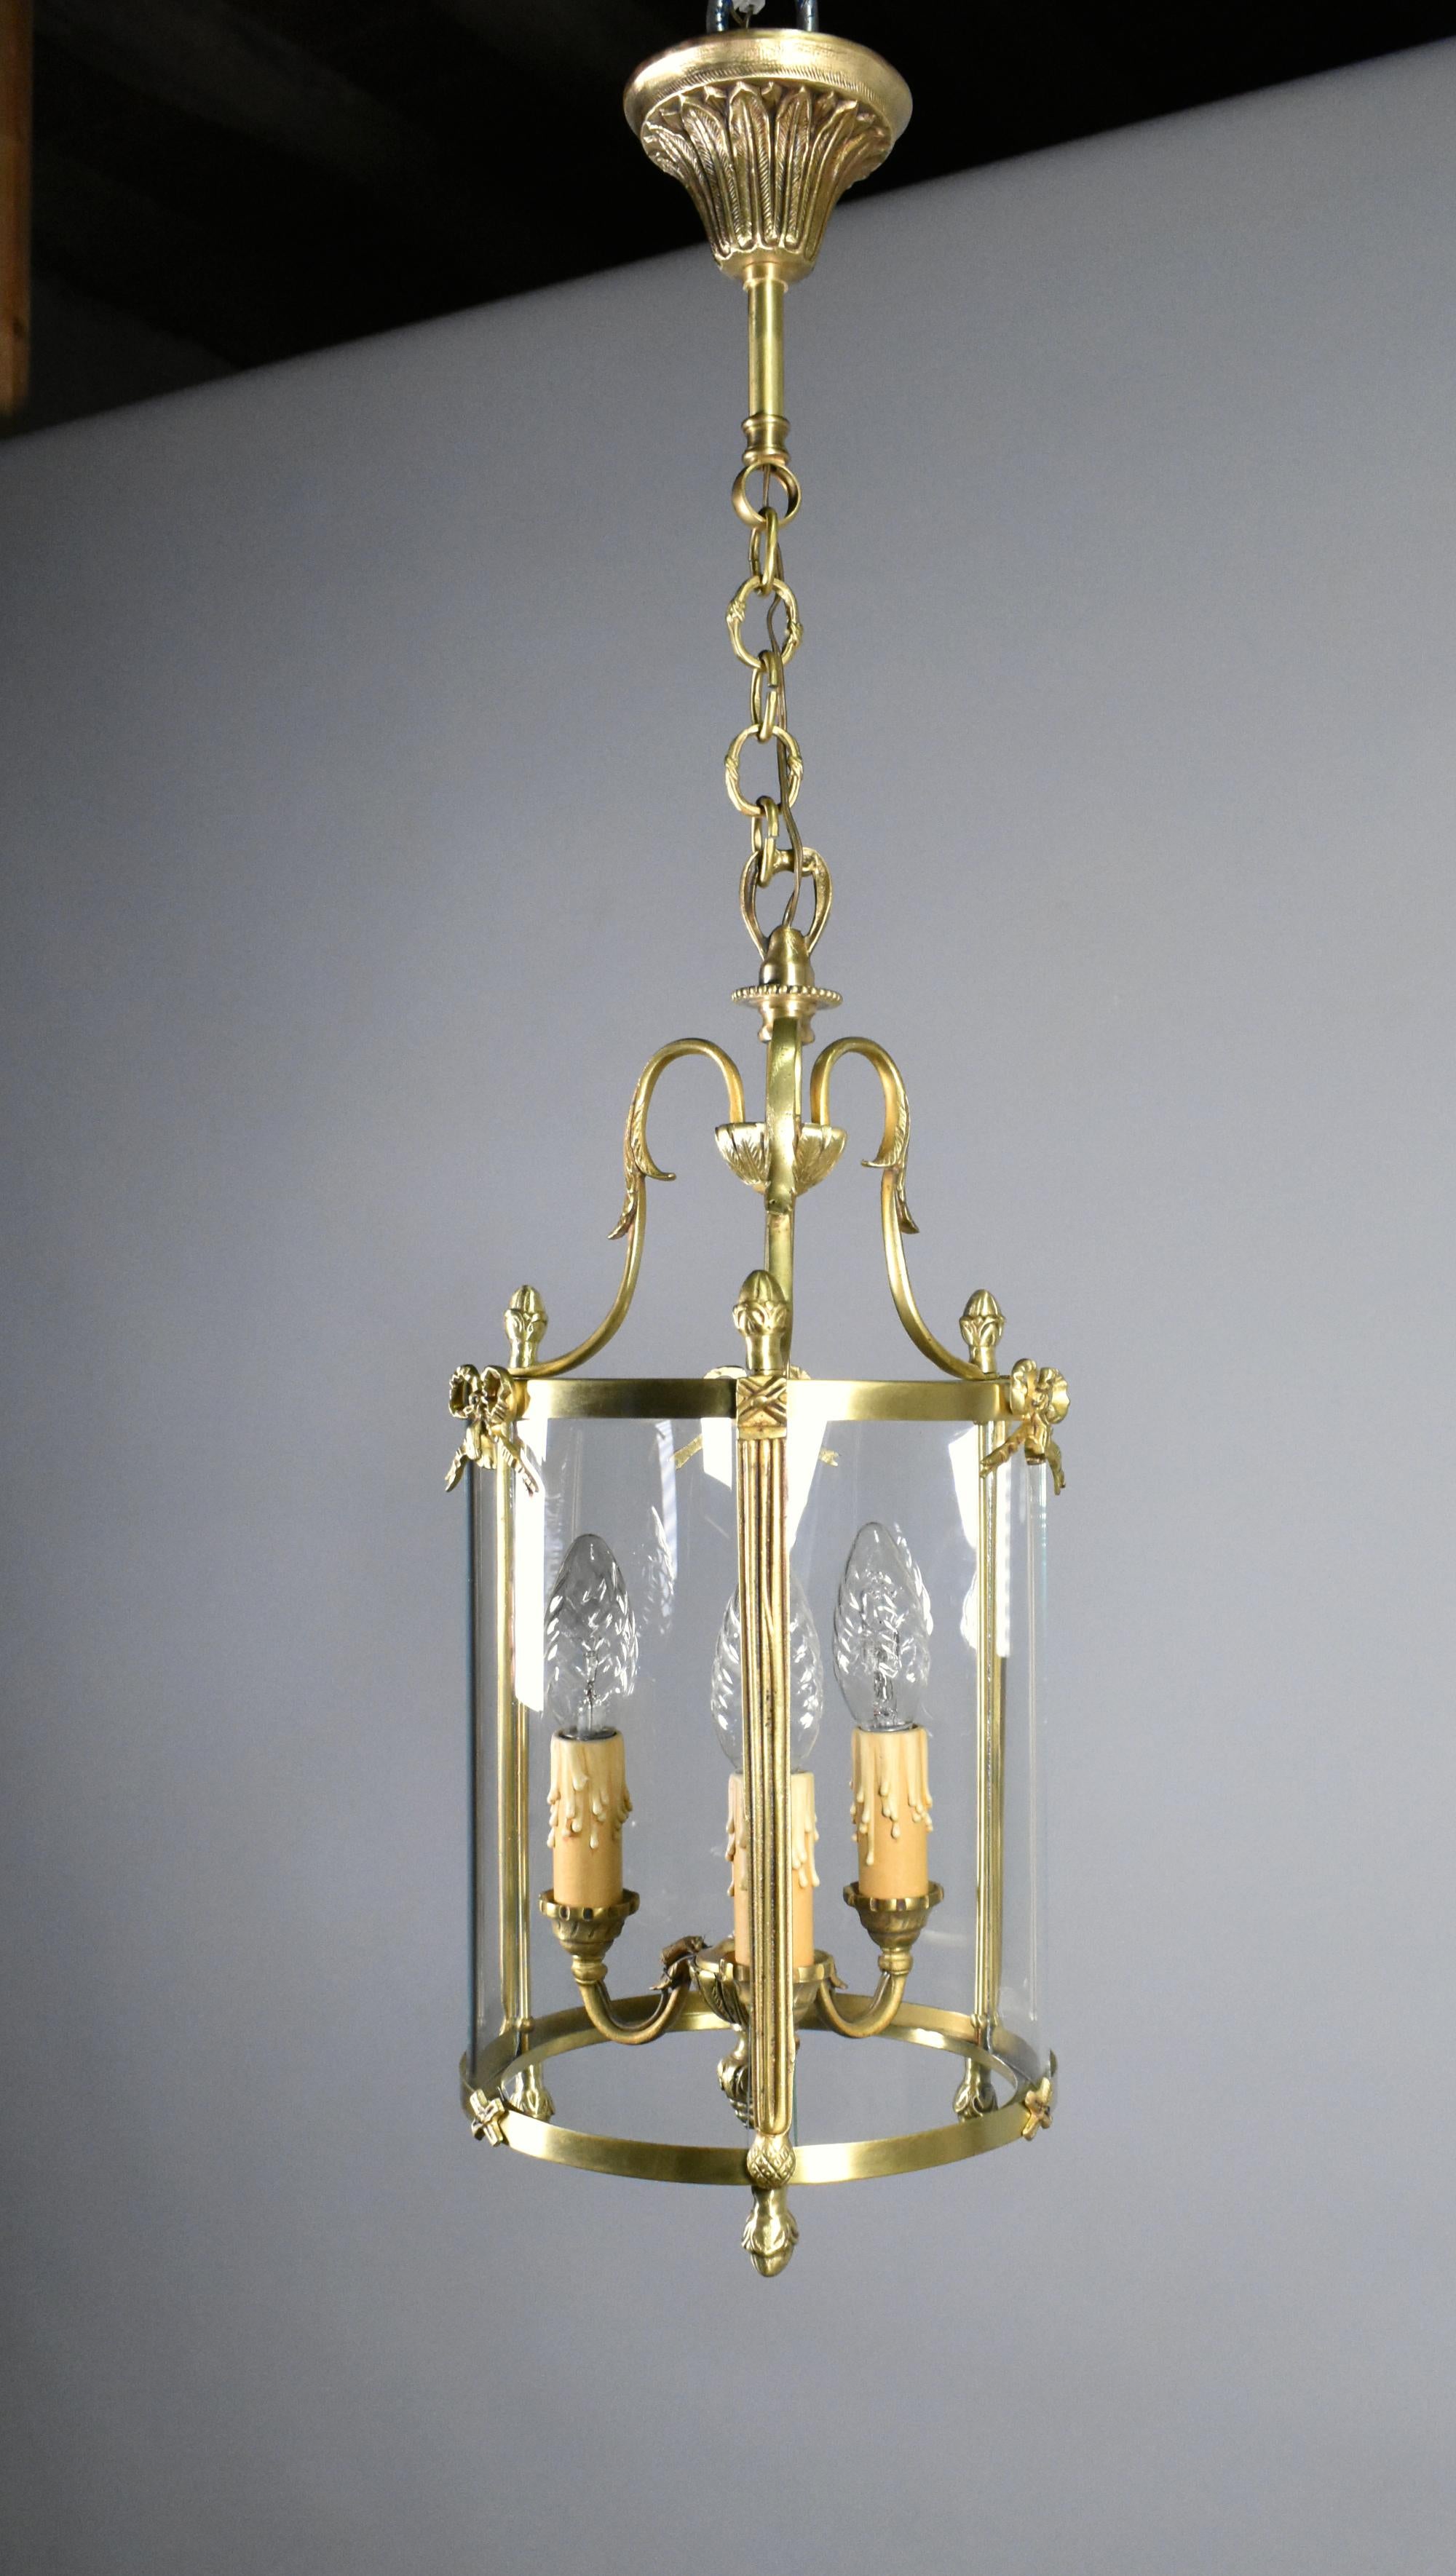 French Triple Light Hall Lantern in Bronze Louis XVI Style
 
This attractive French Hall Lantern in bronze hangs from a floral decorated ceiling rose on a chain that is adjustable according to the height needed.
 
The central stem leds down to three